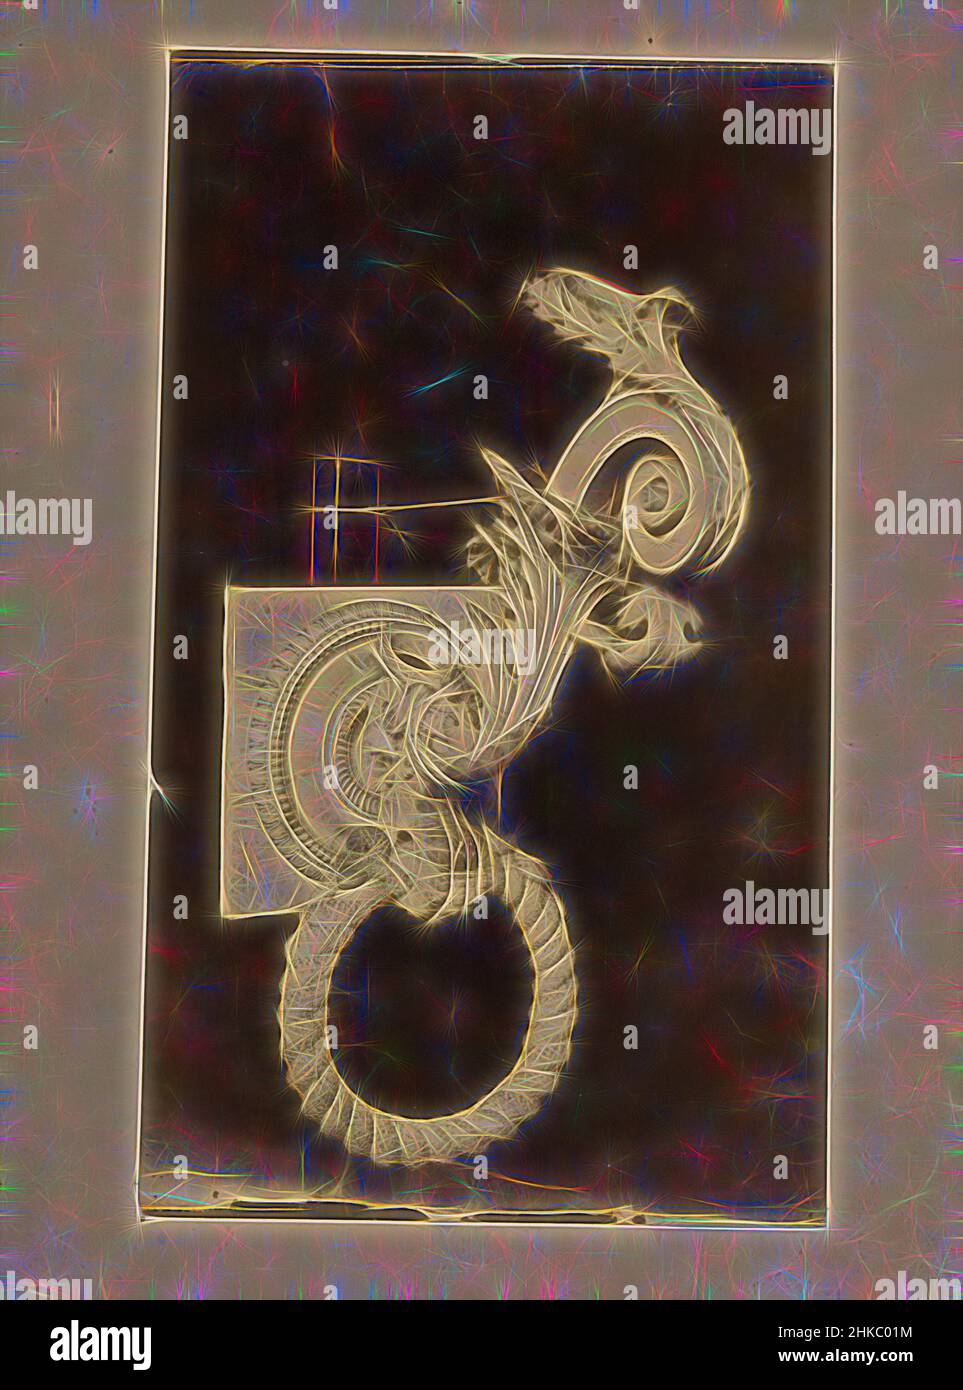 Inspired by Door knocker in the form of snakes, Europe, c. 1875 - c. 1900, albumen print, height 266 mm × width 155 mm, Reimagined by Artotop. Classic art reinvented with a modern twist. Design of warm cheerful glowing of brightness and light ray radiance. Photography inspired by surrealism and futurism, embracing dynamic energy of modern technology, movement, speed and revolutionize culture Stock Photo